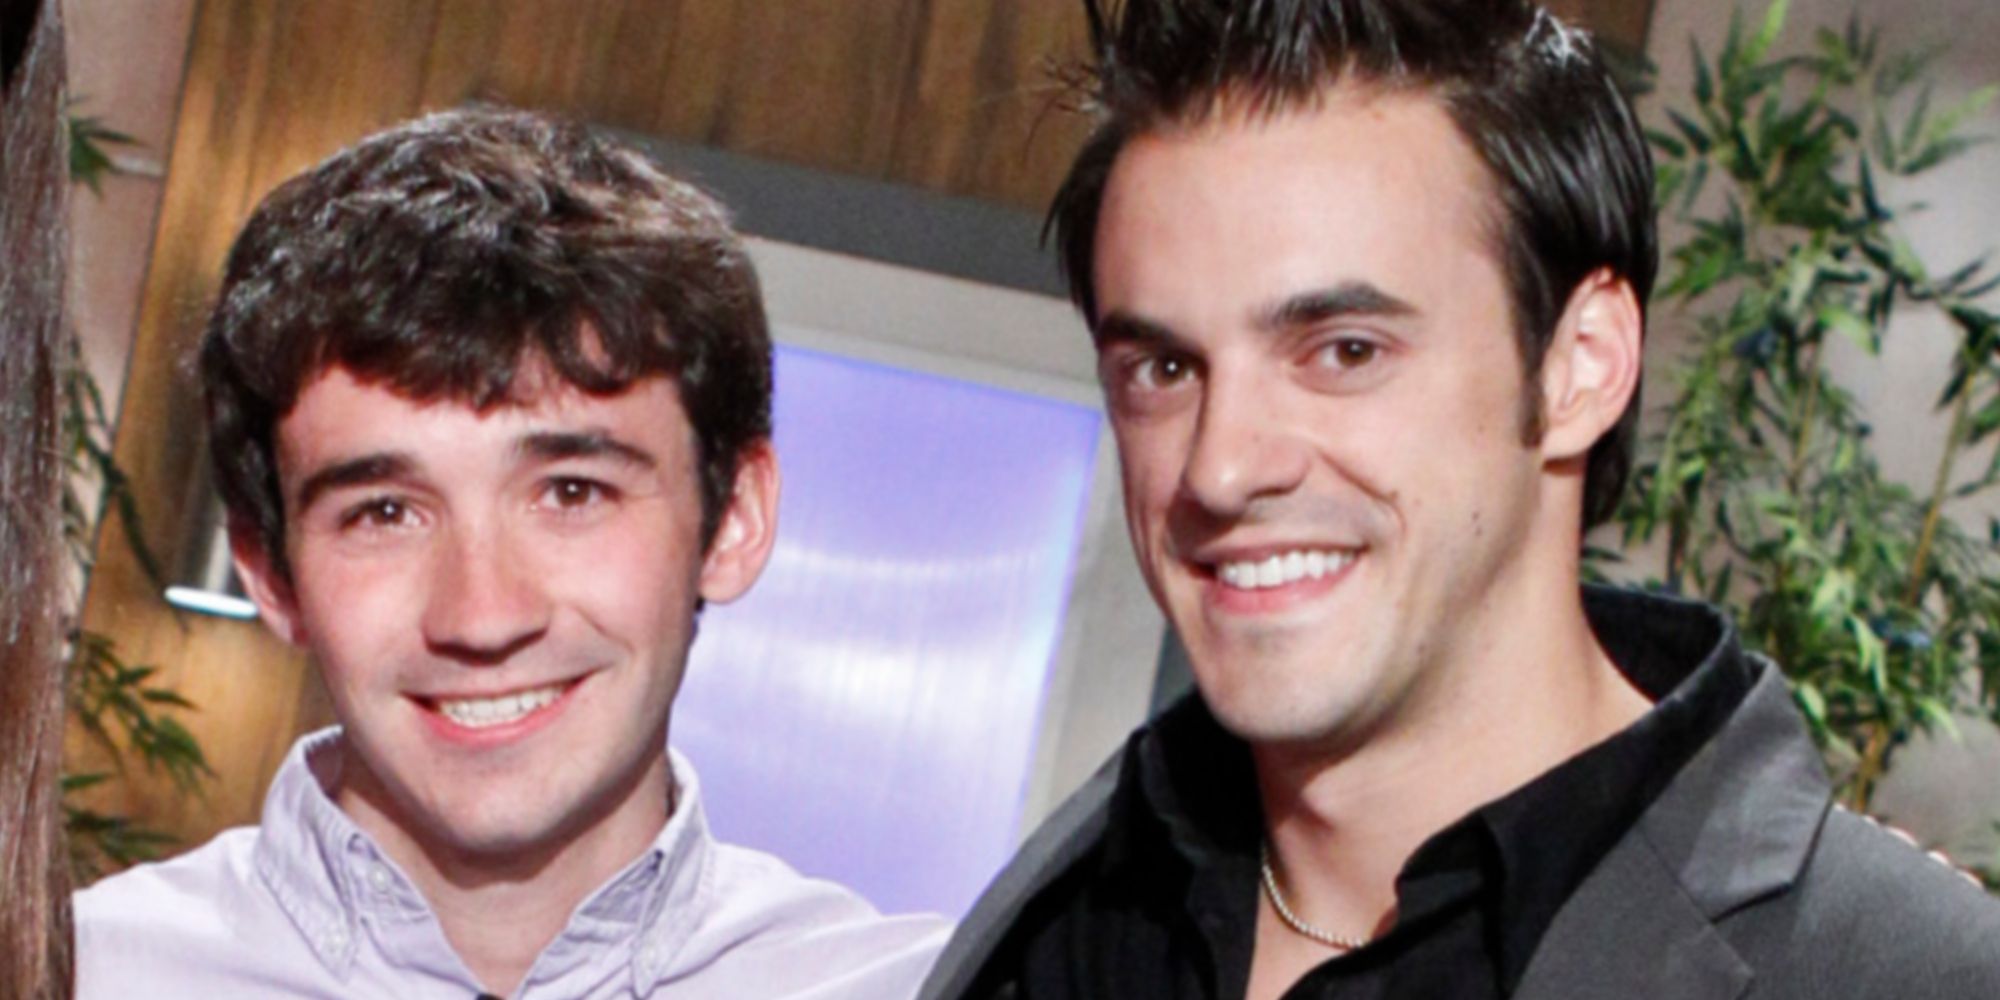 Ian Terry and Dan Gheesling posing together at the finale of Big Brother 14.